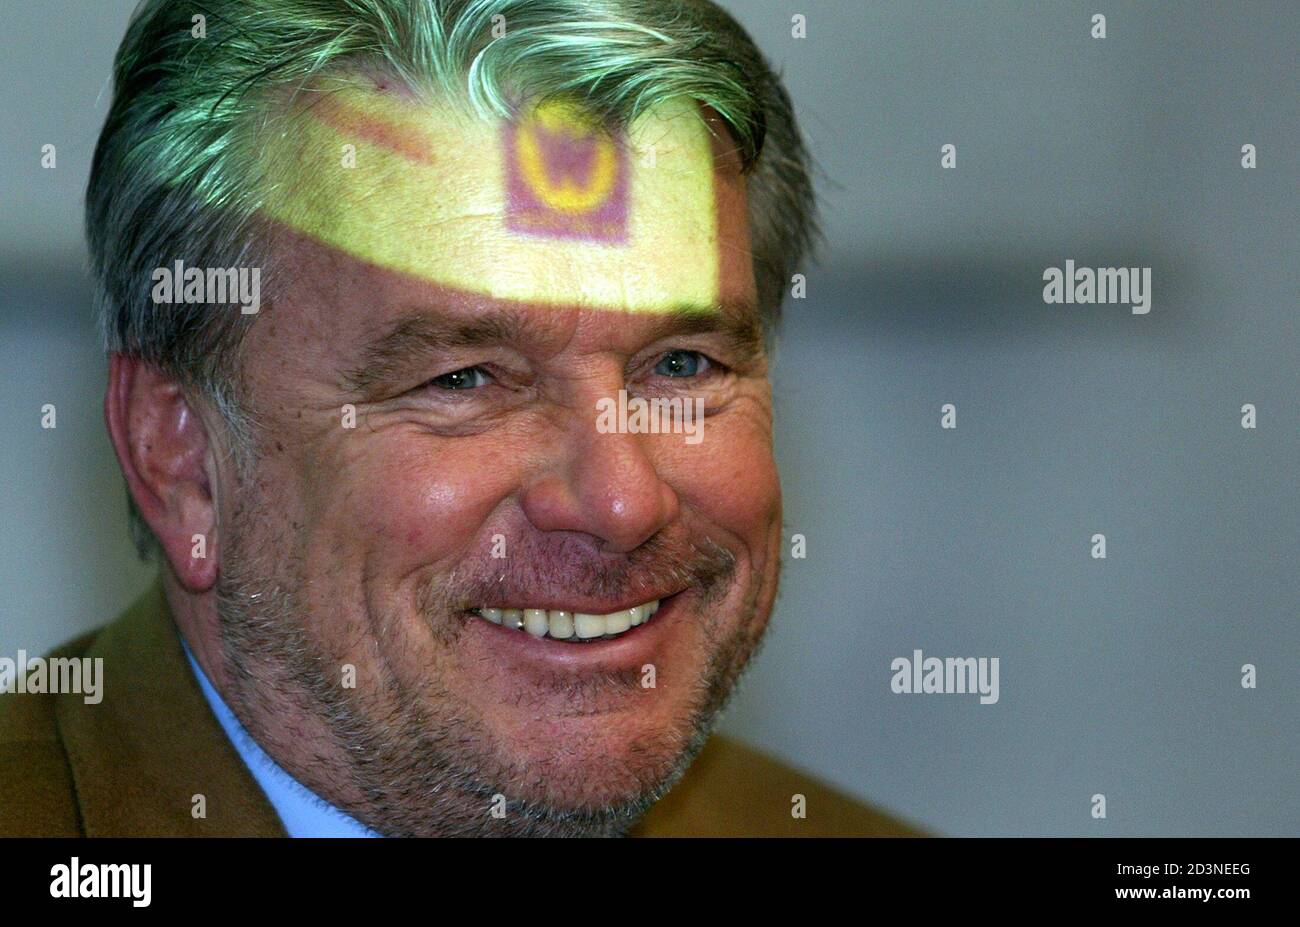 Strabag CEO Haselsteiner has a logo of Walter Bau AG projected on to his  forehead during a news conference in Augsburg. Chief Executive Officer  (CEO) Hans Peter Haselsteiner of the Austrian building